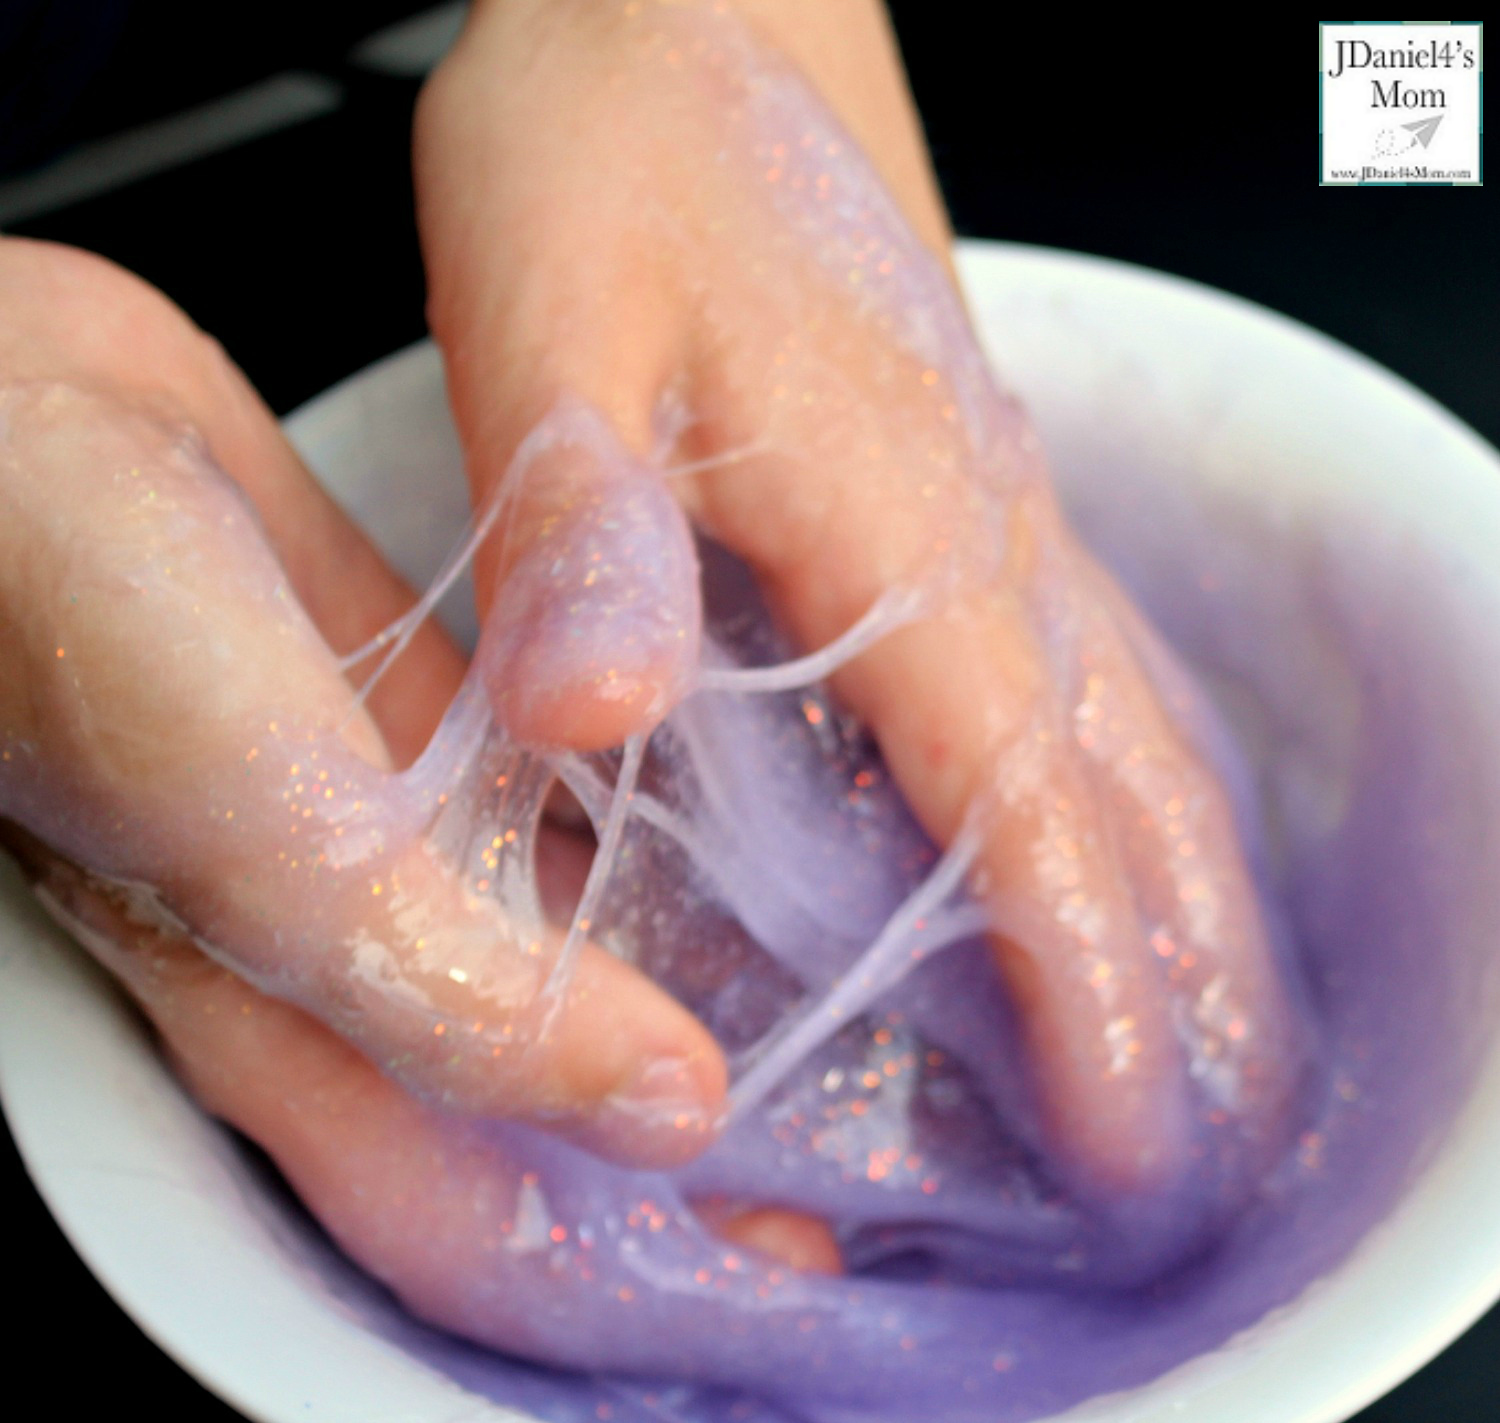 How to Make Slime with Saline Solution Coding Activity - Exploring Slime with Two Hands